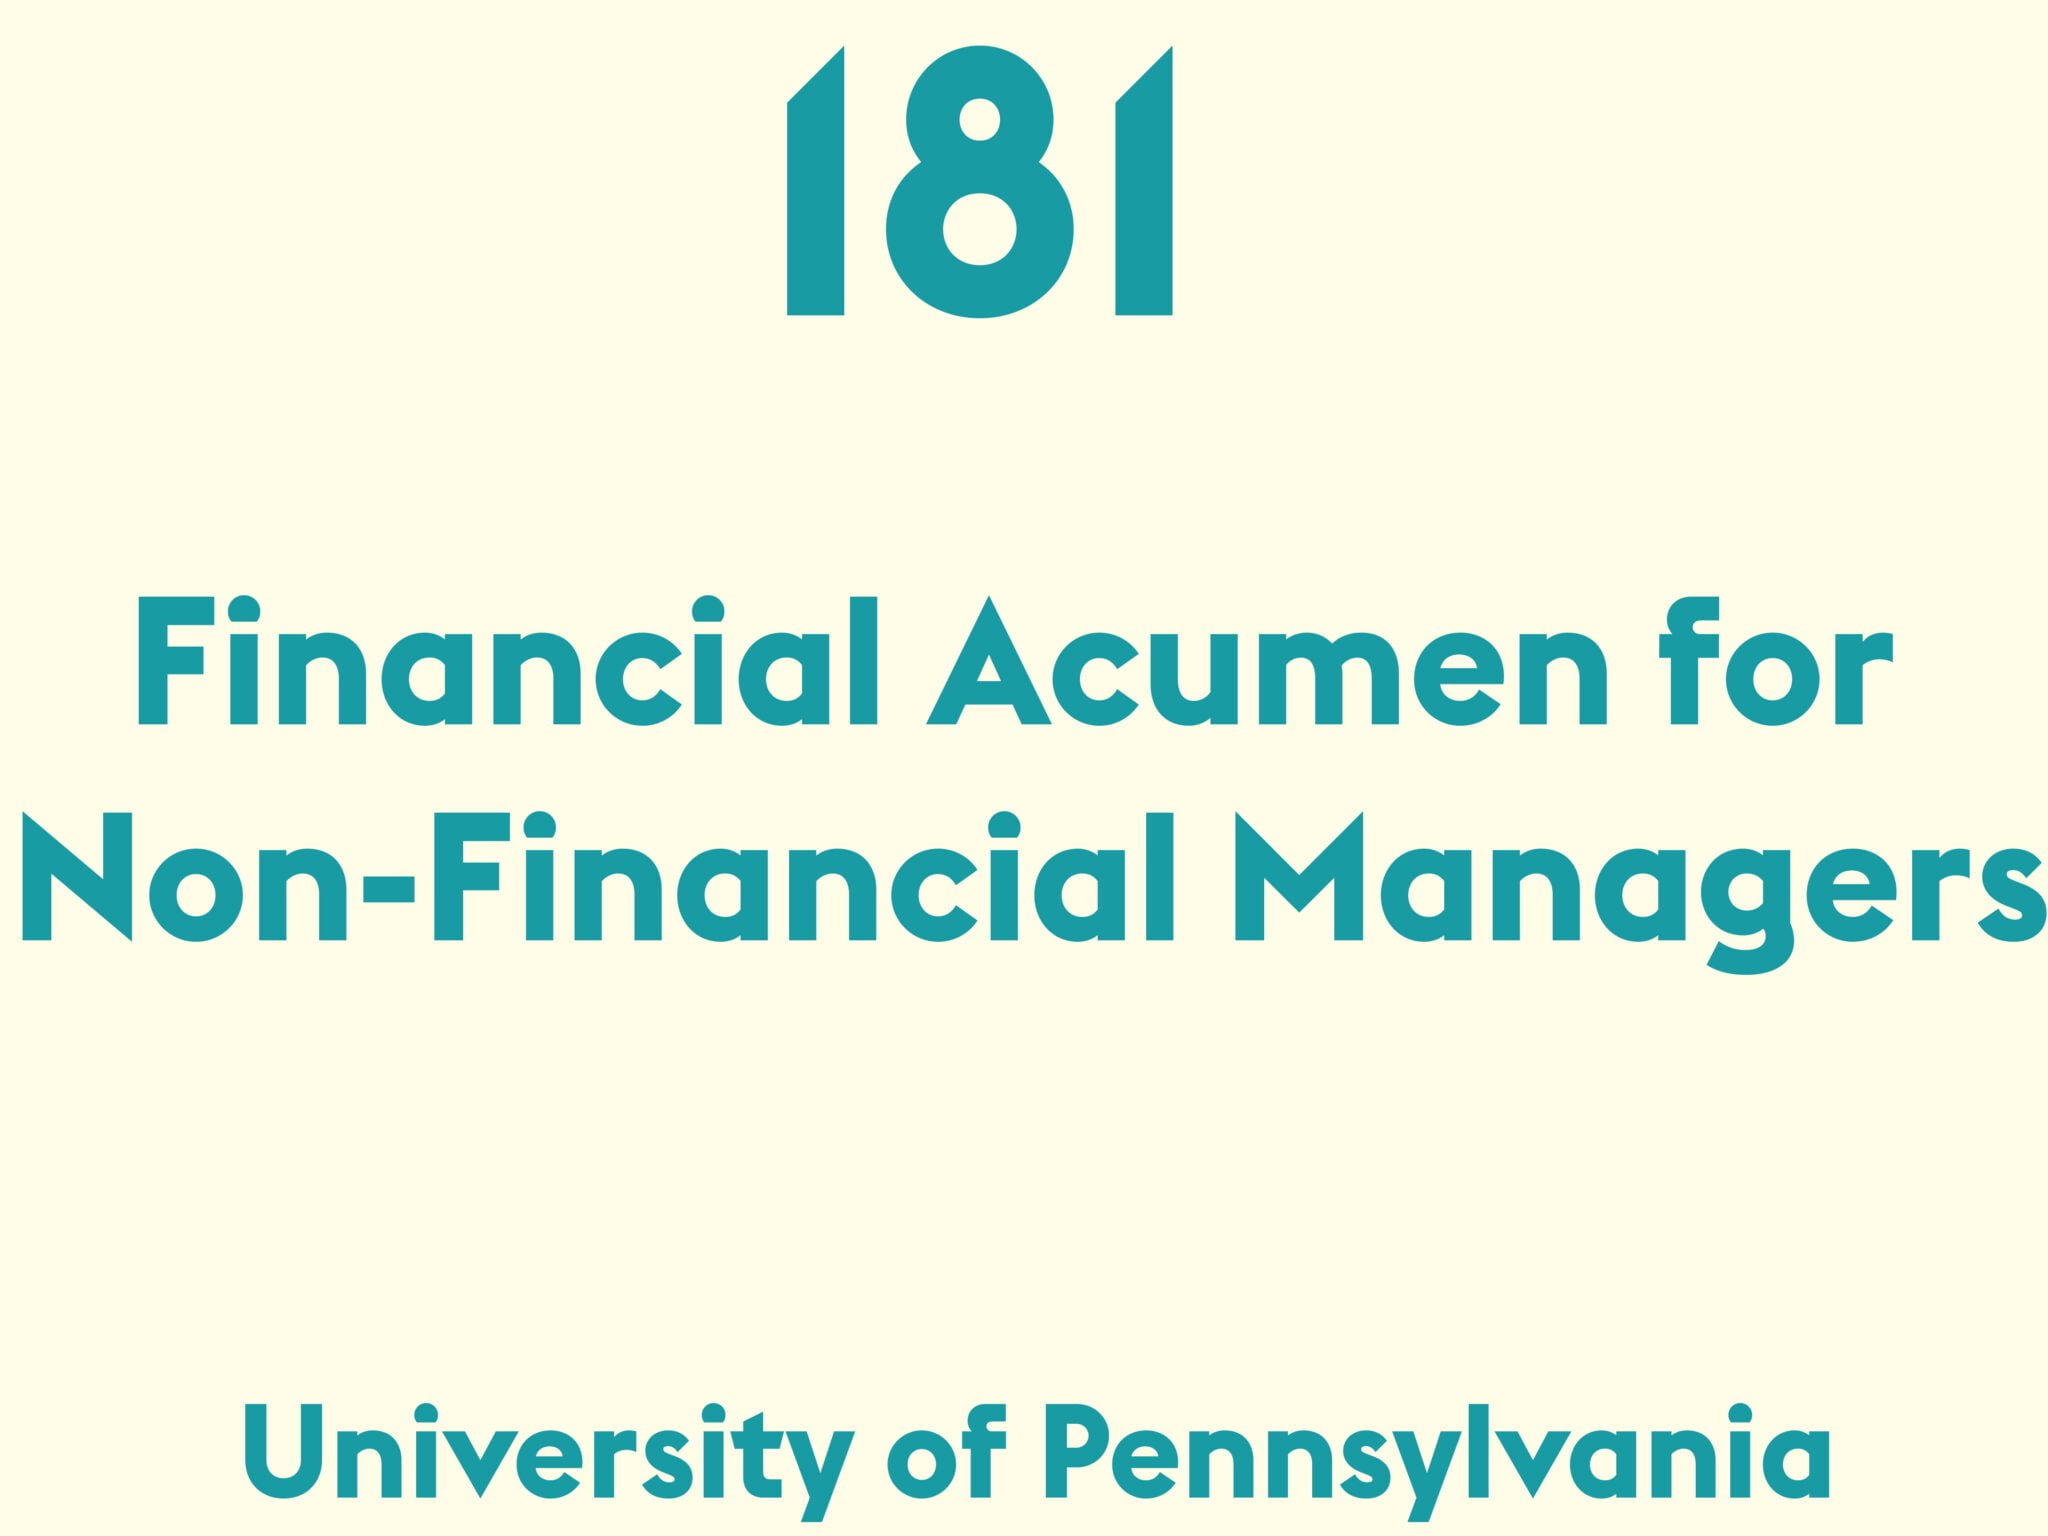 Financial Acumen for Non-Financial Managers